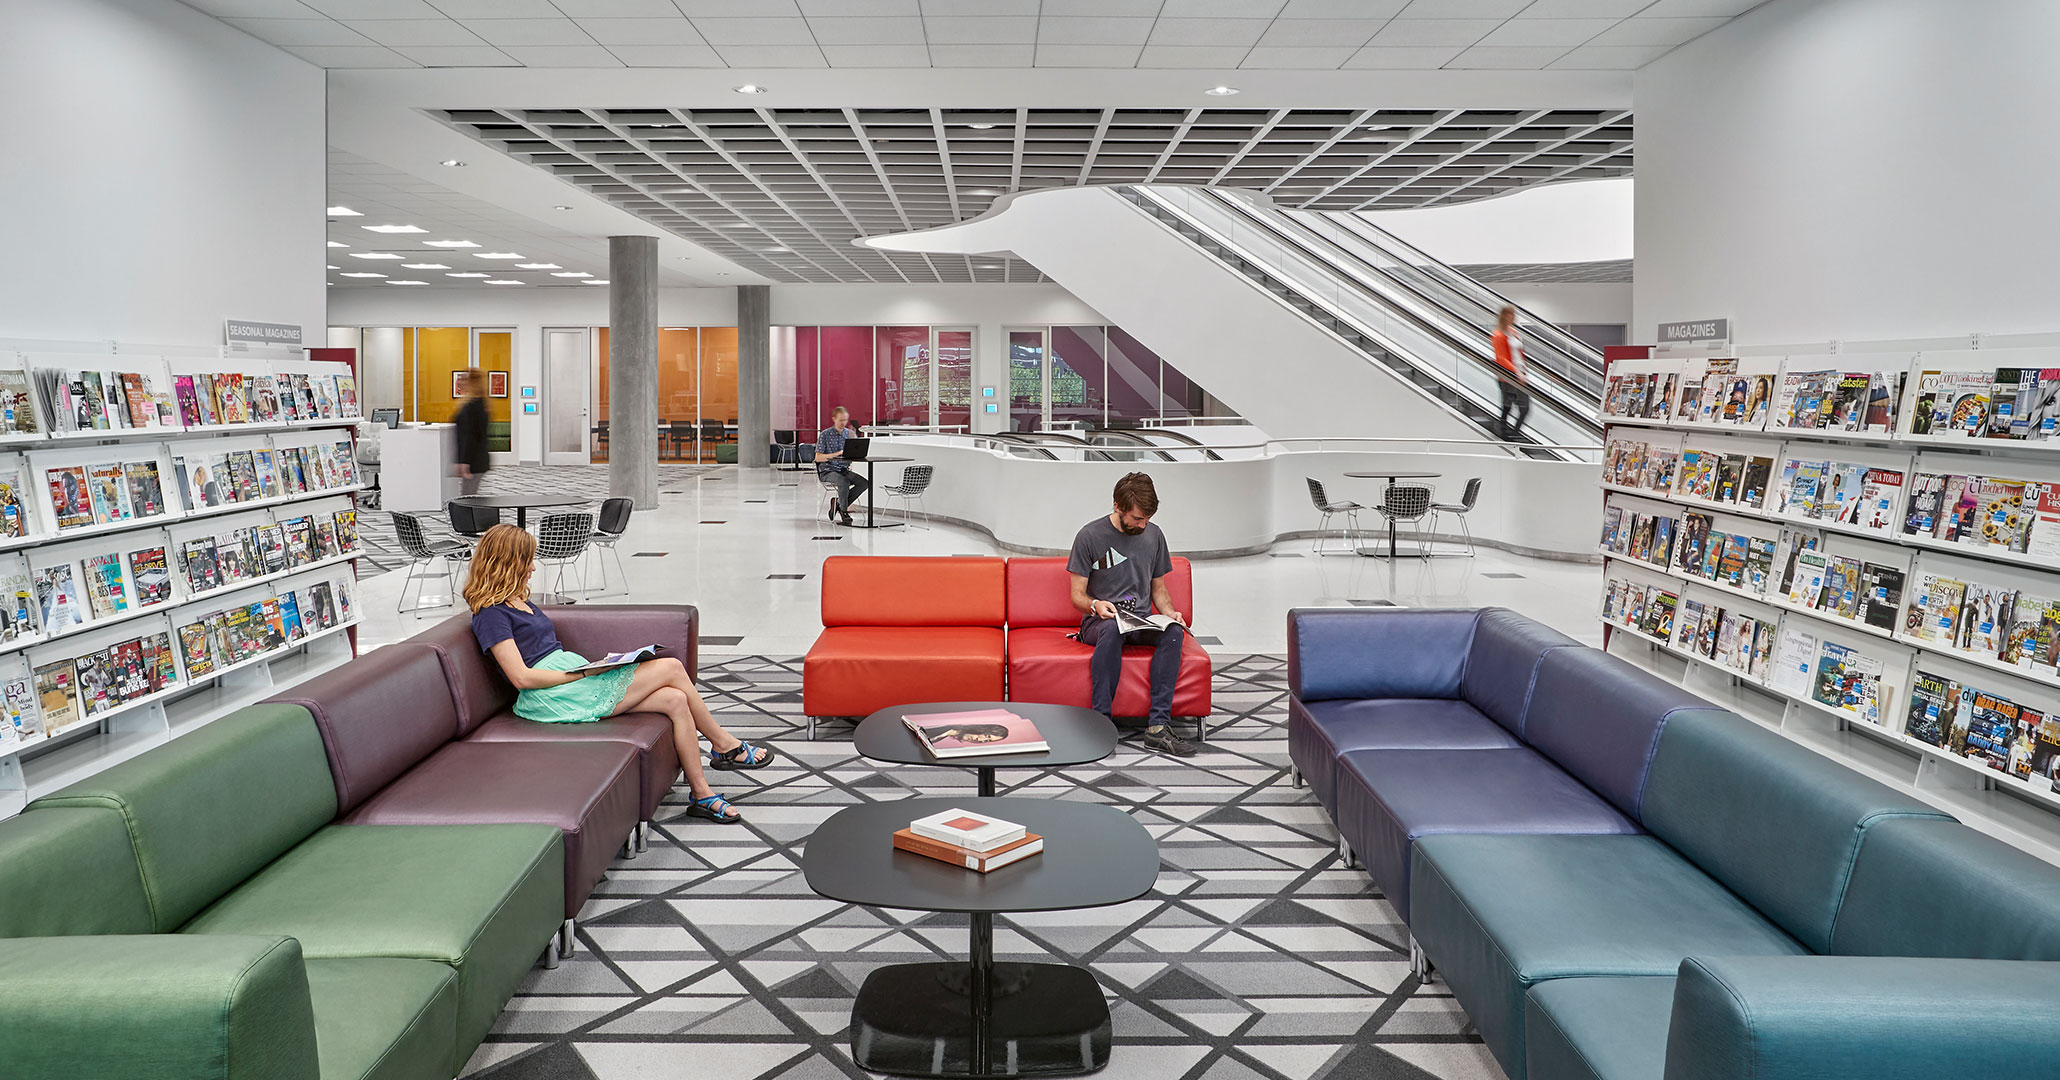 Richland County Library hired Boudreaux architects to completely redesign the interiors of the Main location.